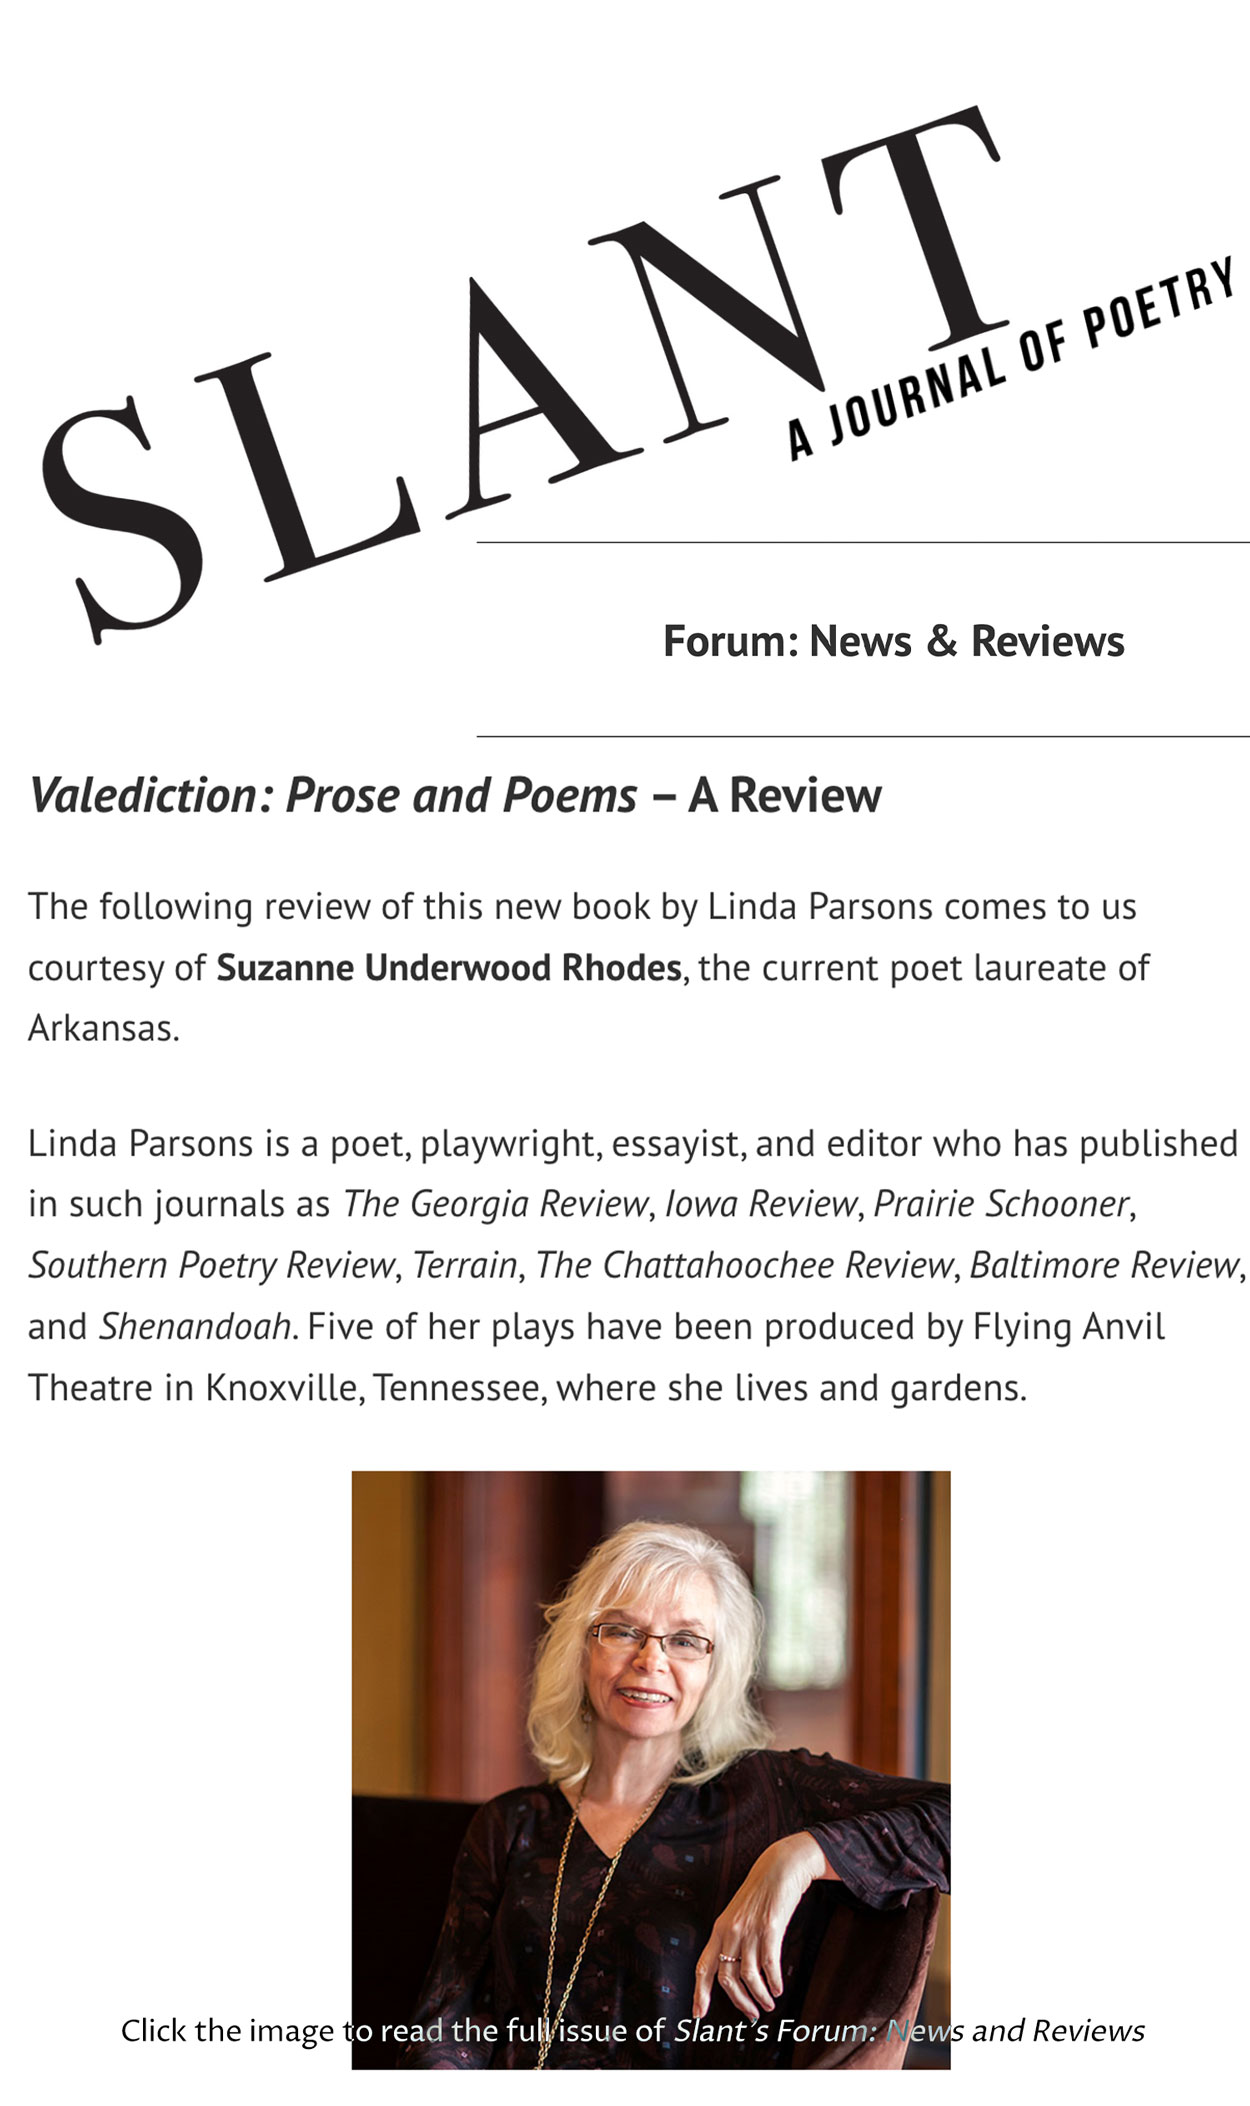 The issue of Slant in which Linda Parsons' review appears.